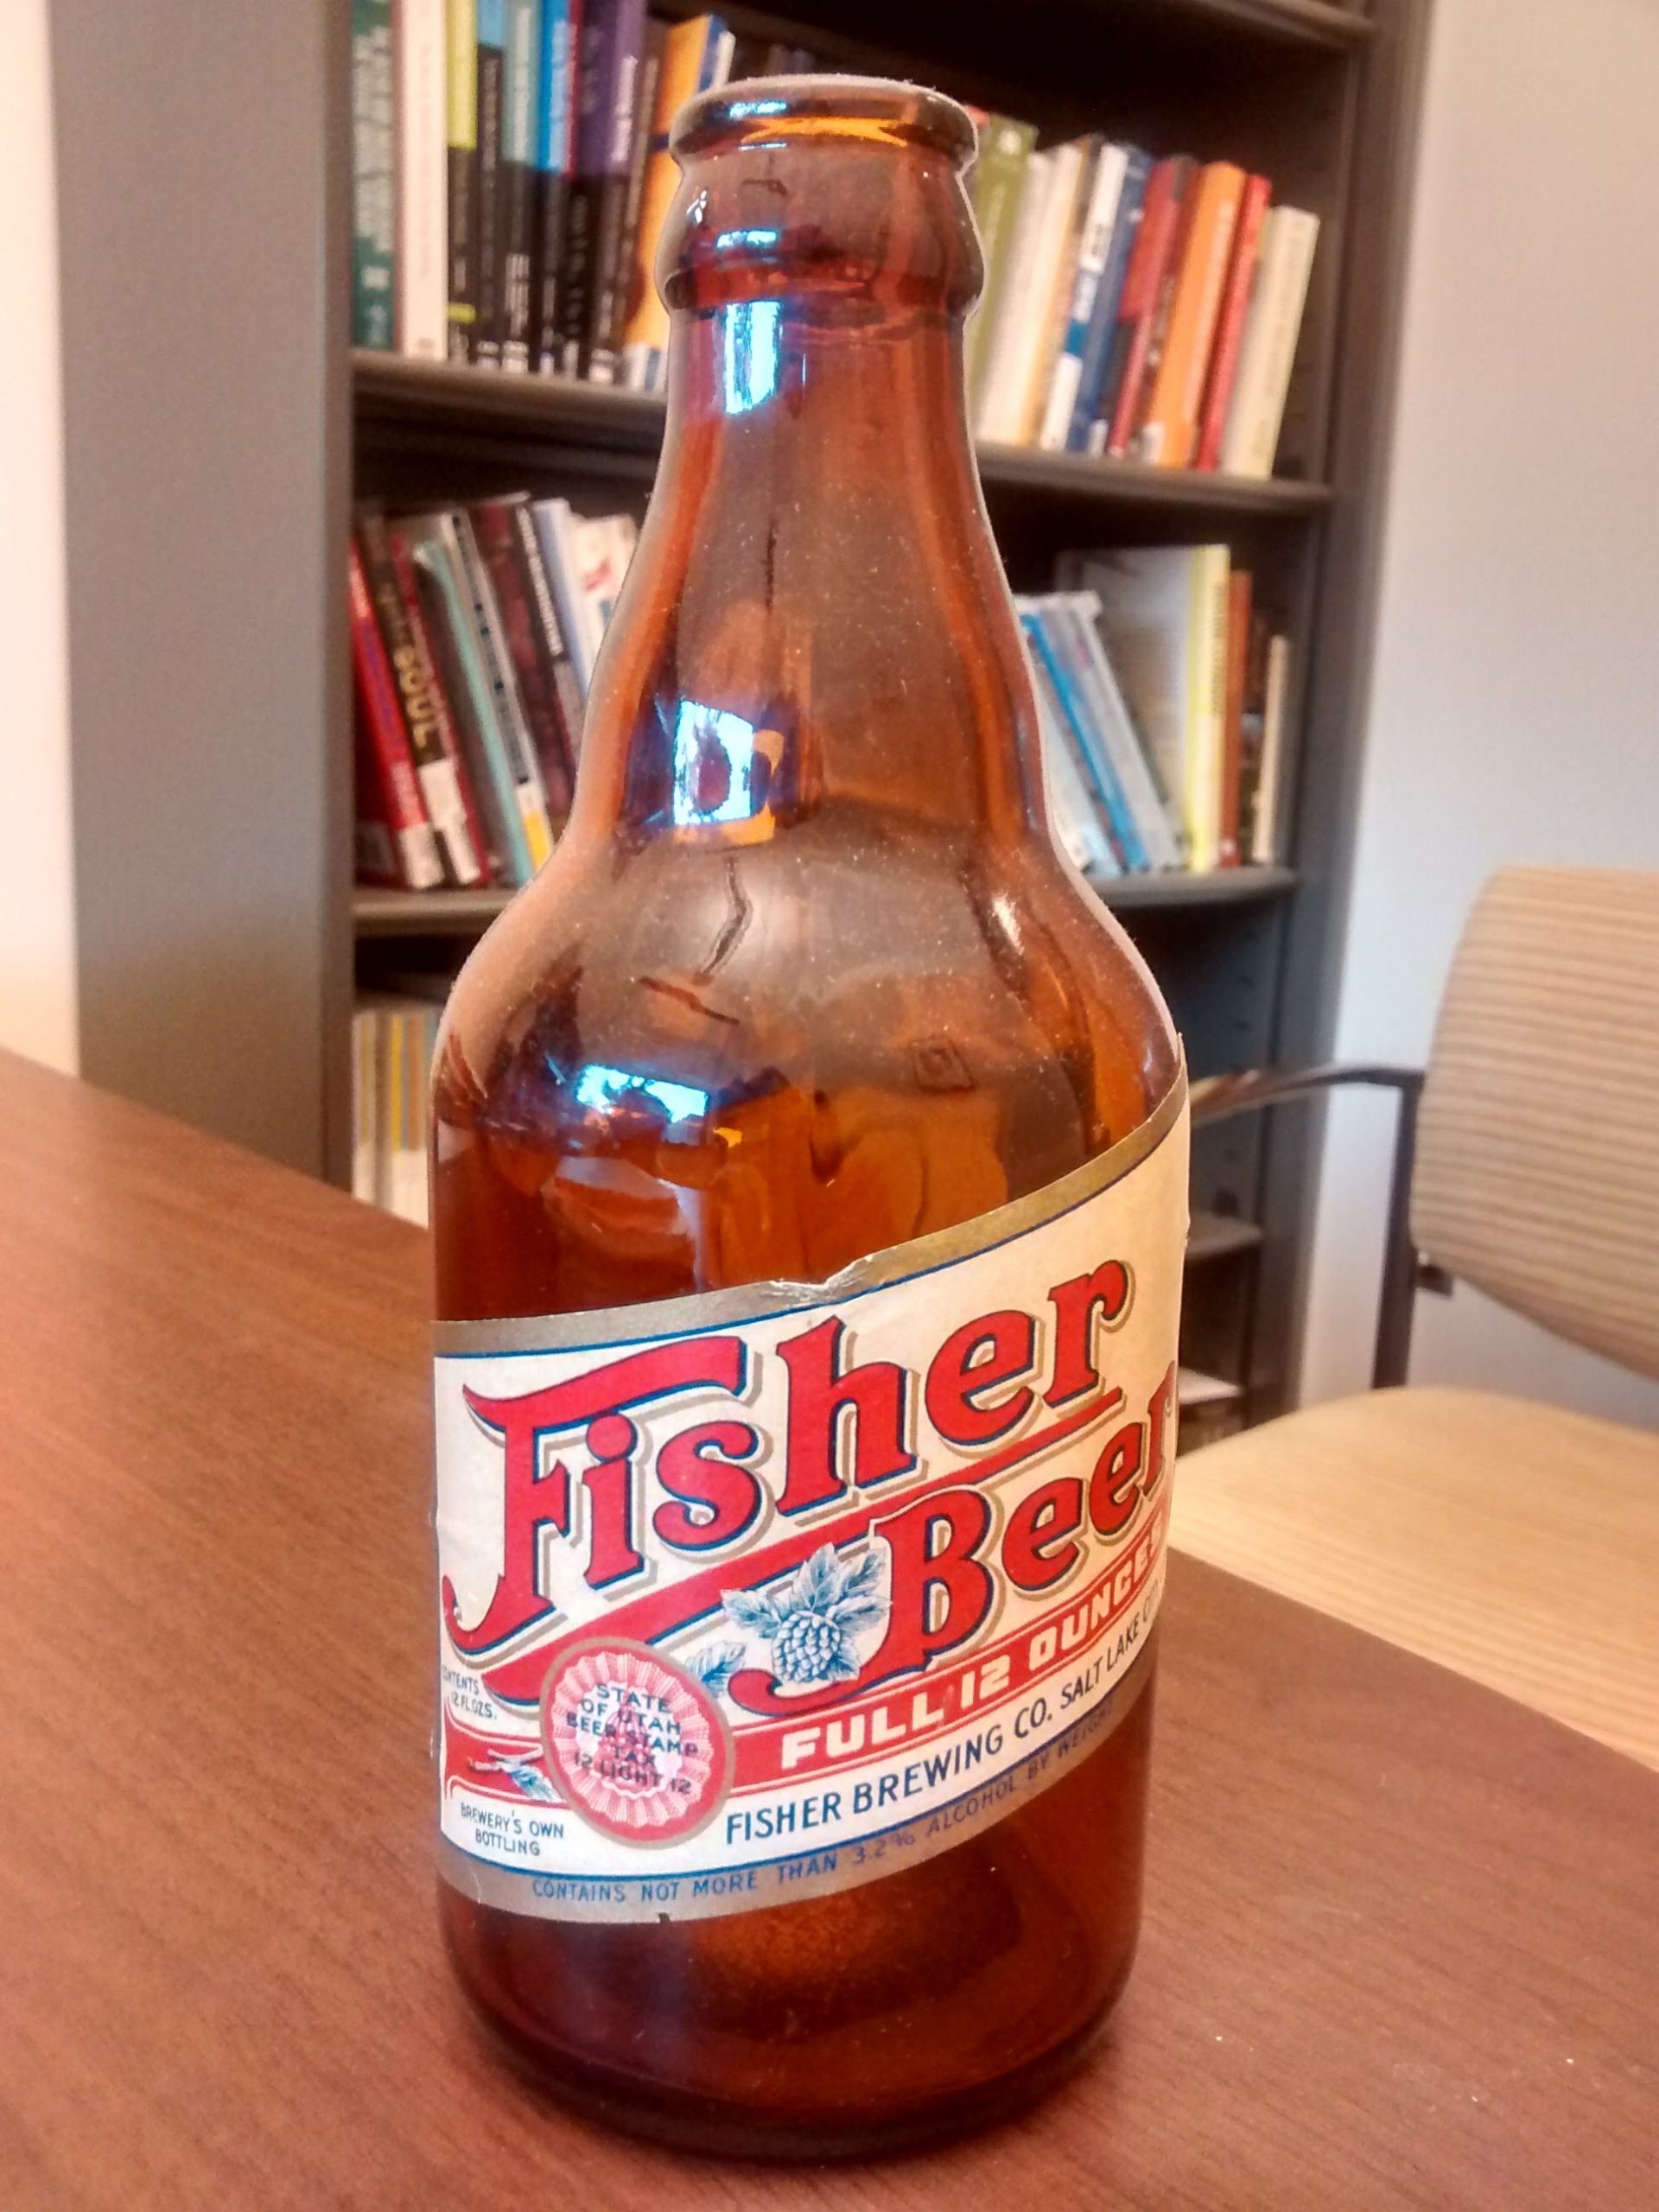 A picture of a beer bottle pulled from the attic: Fisher Beer.